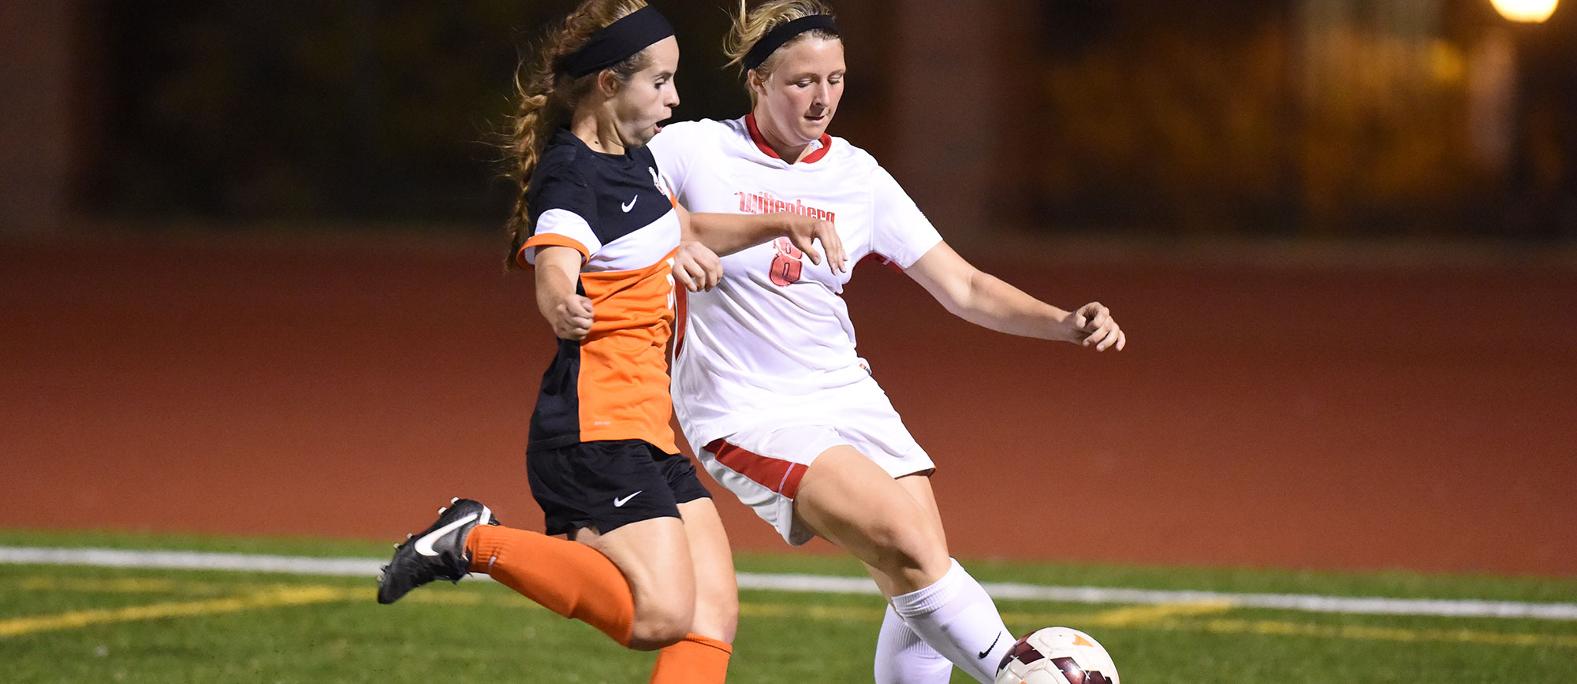 Leah Soutar and the Tigers picked up a much-needed three points with 3-1 win over Oberlin. File Photo | Nick Falzerano